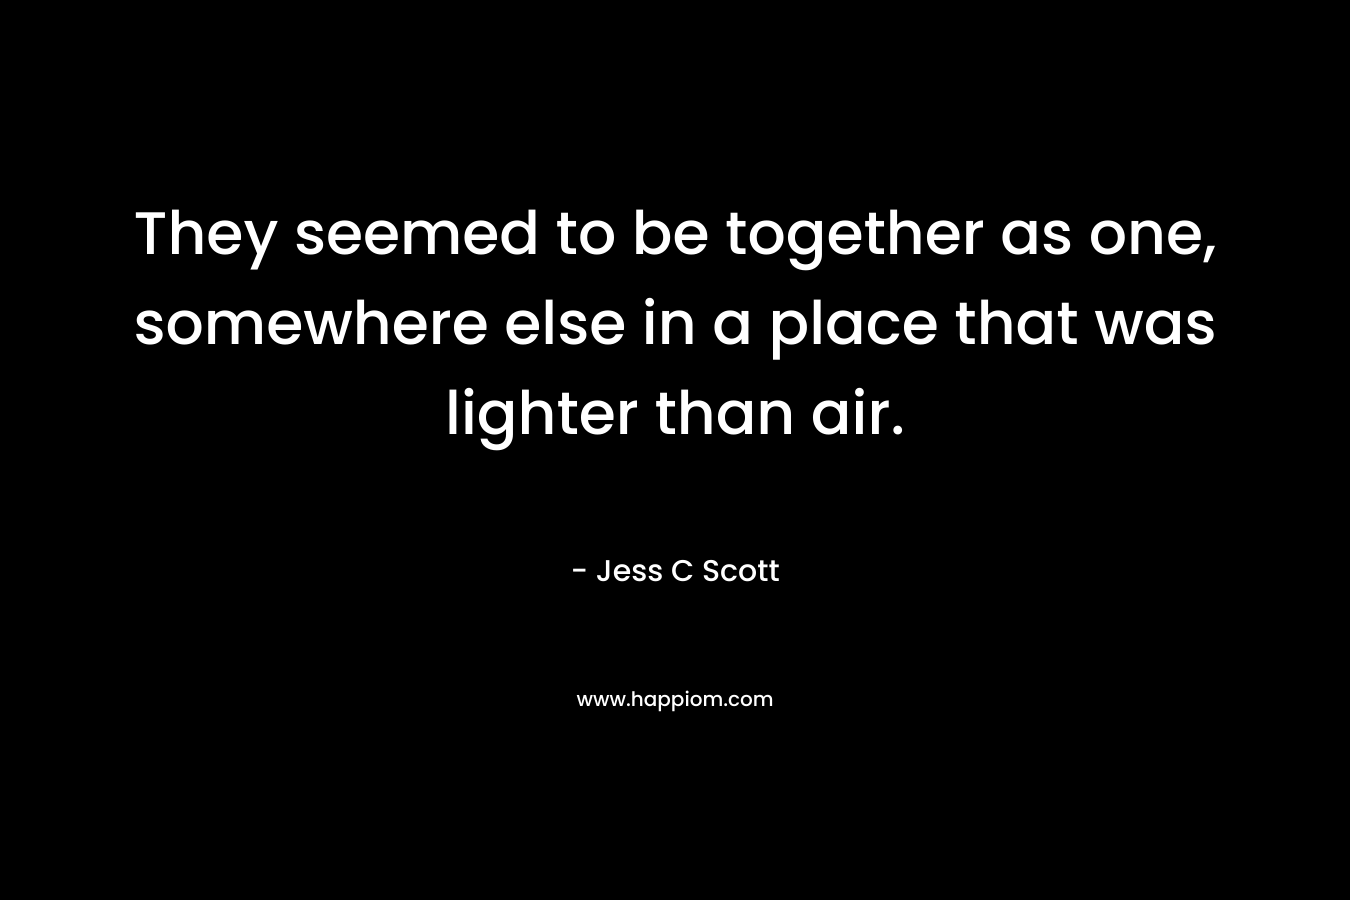 They seemed to be together as one, somewhere else in a place that was lighter than air.